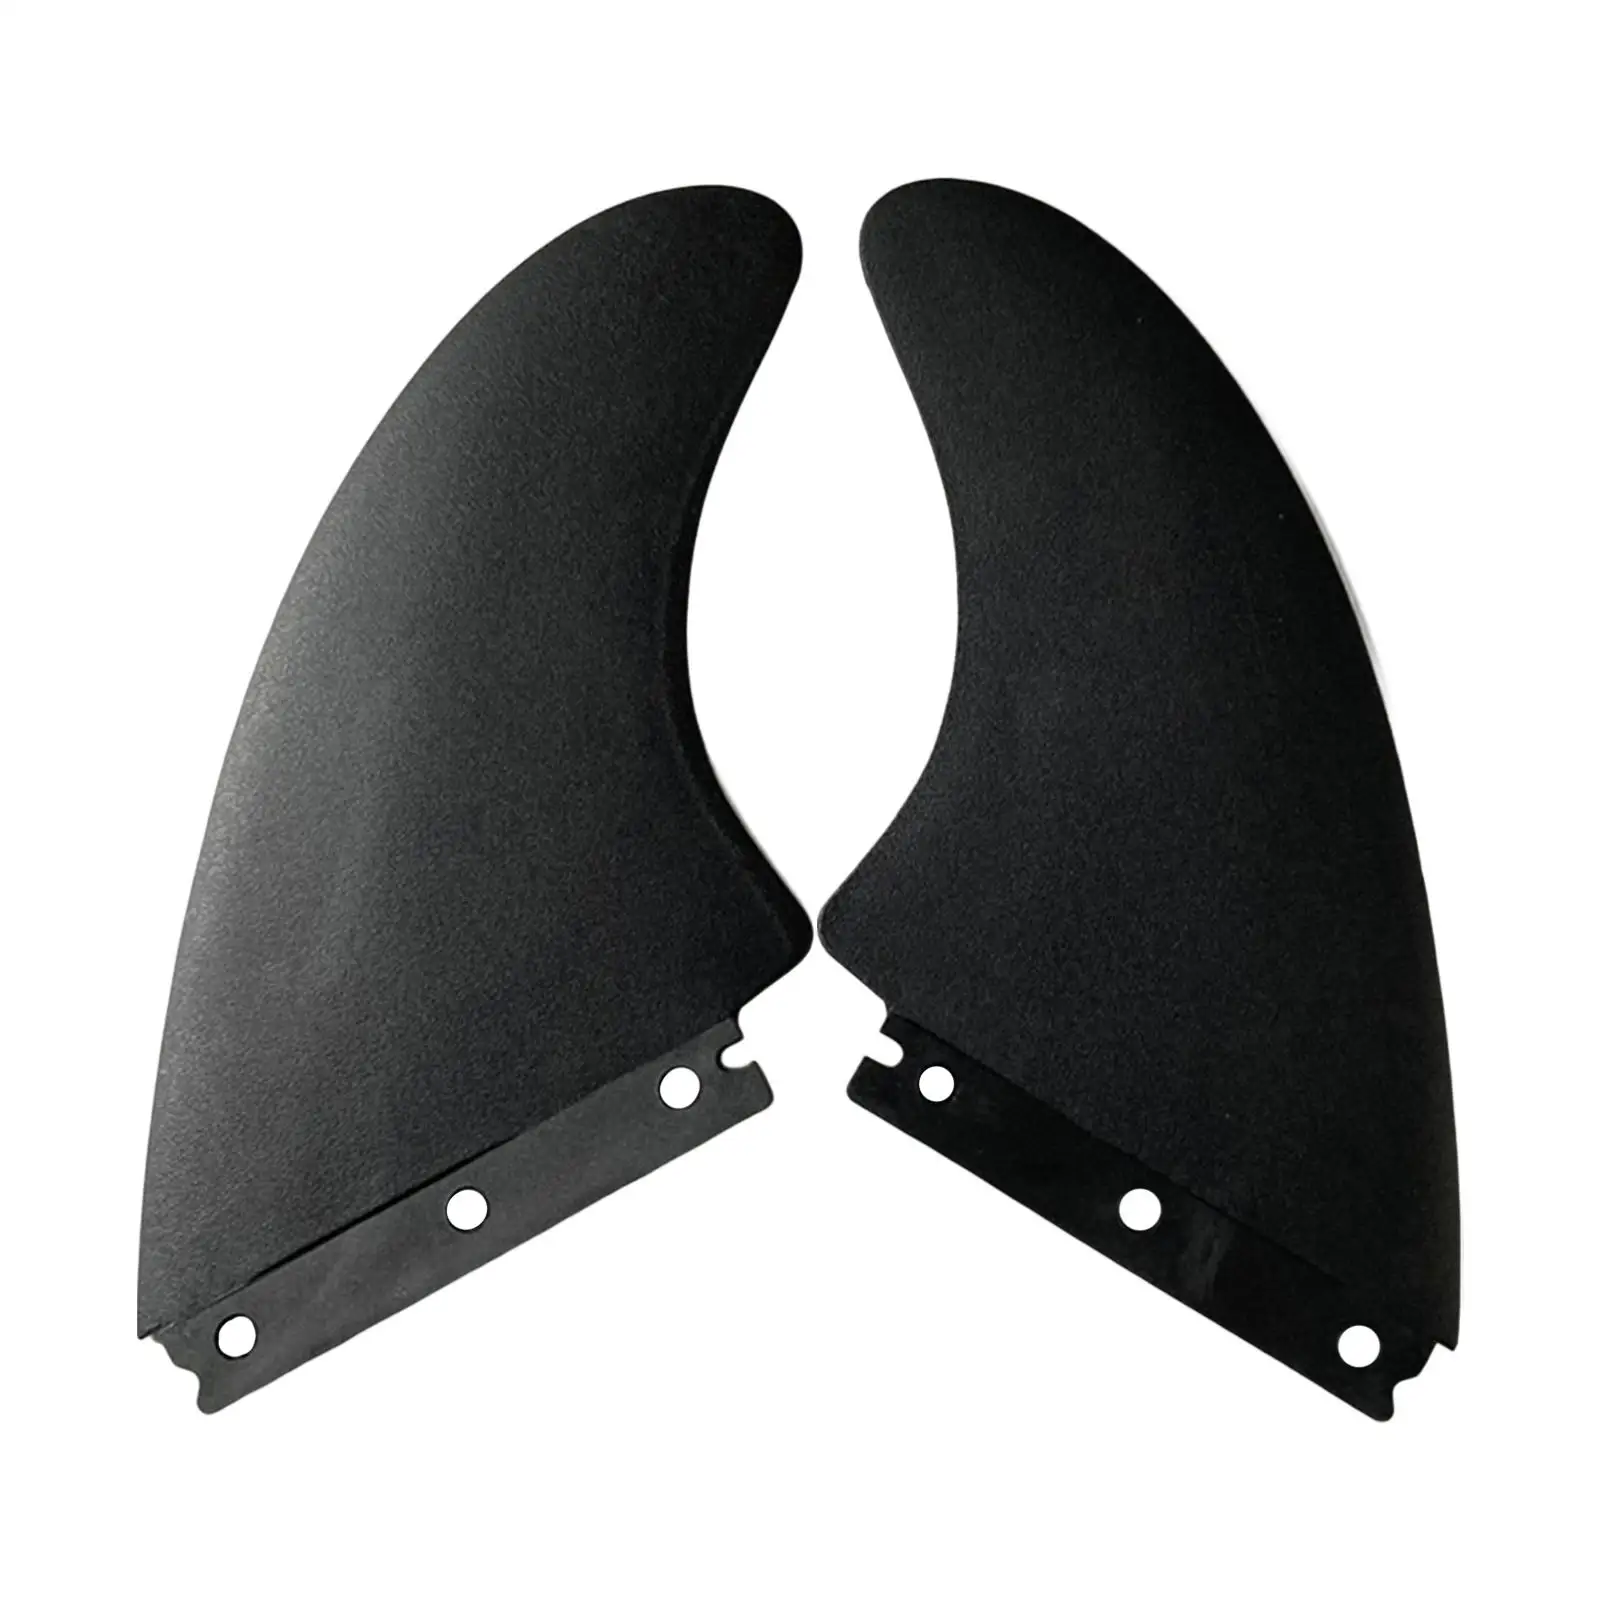 2x Universal Surfboard Fins, Surf Durable Surfing Fin Replacement Fin for Water Sport Dinghy Surfboard Paddleboard Accessories